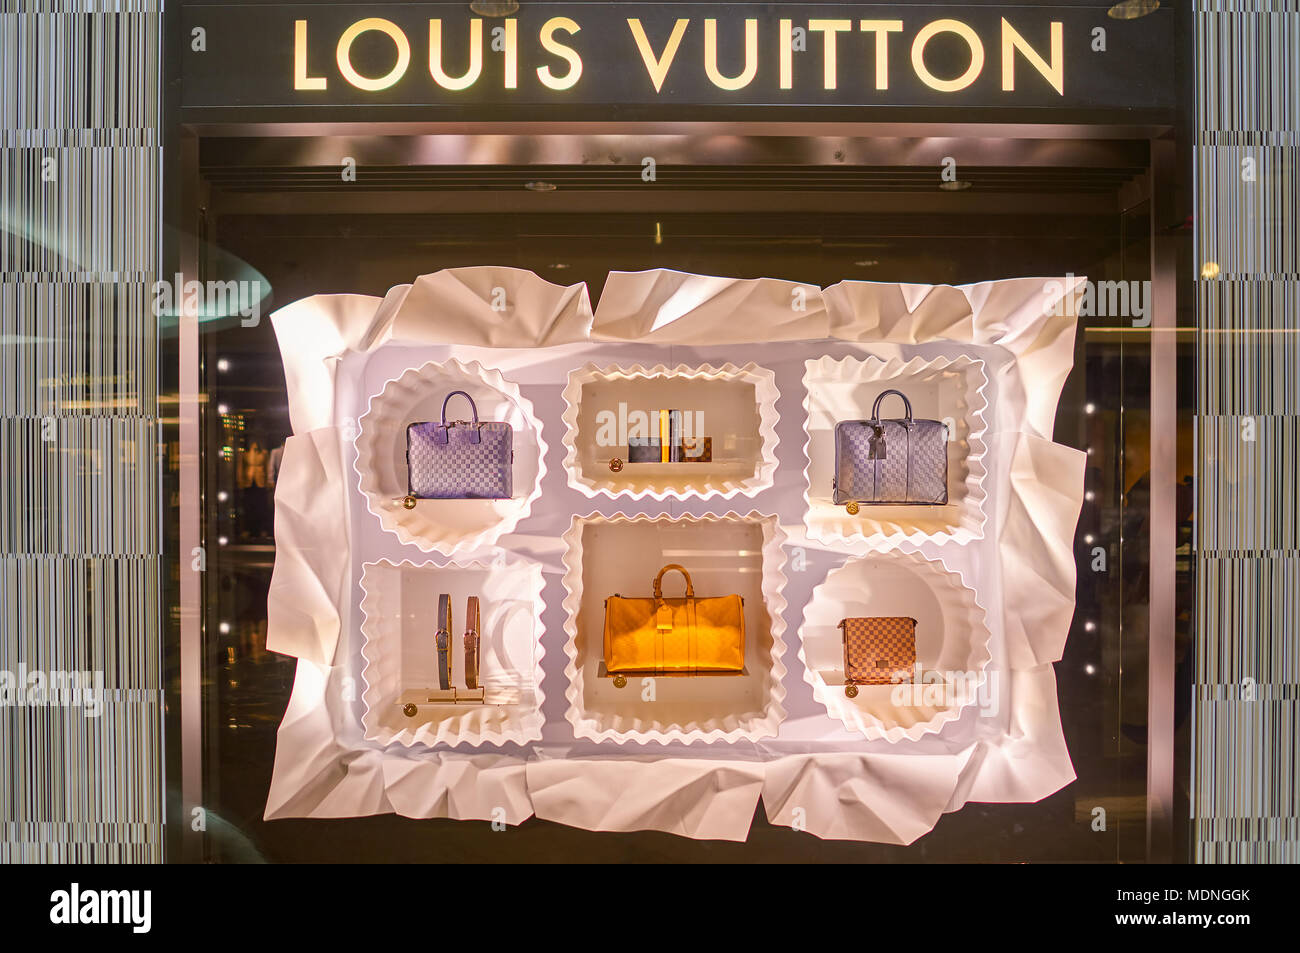 KUALA LUMPUR, MALAYSIA - APRIL 23, 2014: goods on display at Louis Vuitton  store. Louis Vuitton is a French fashion house and luxury retail company  Stock Photo - Alamy